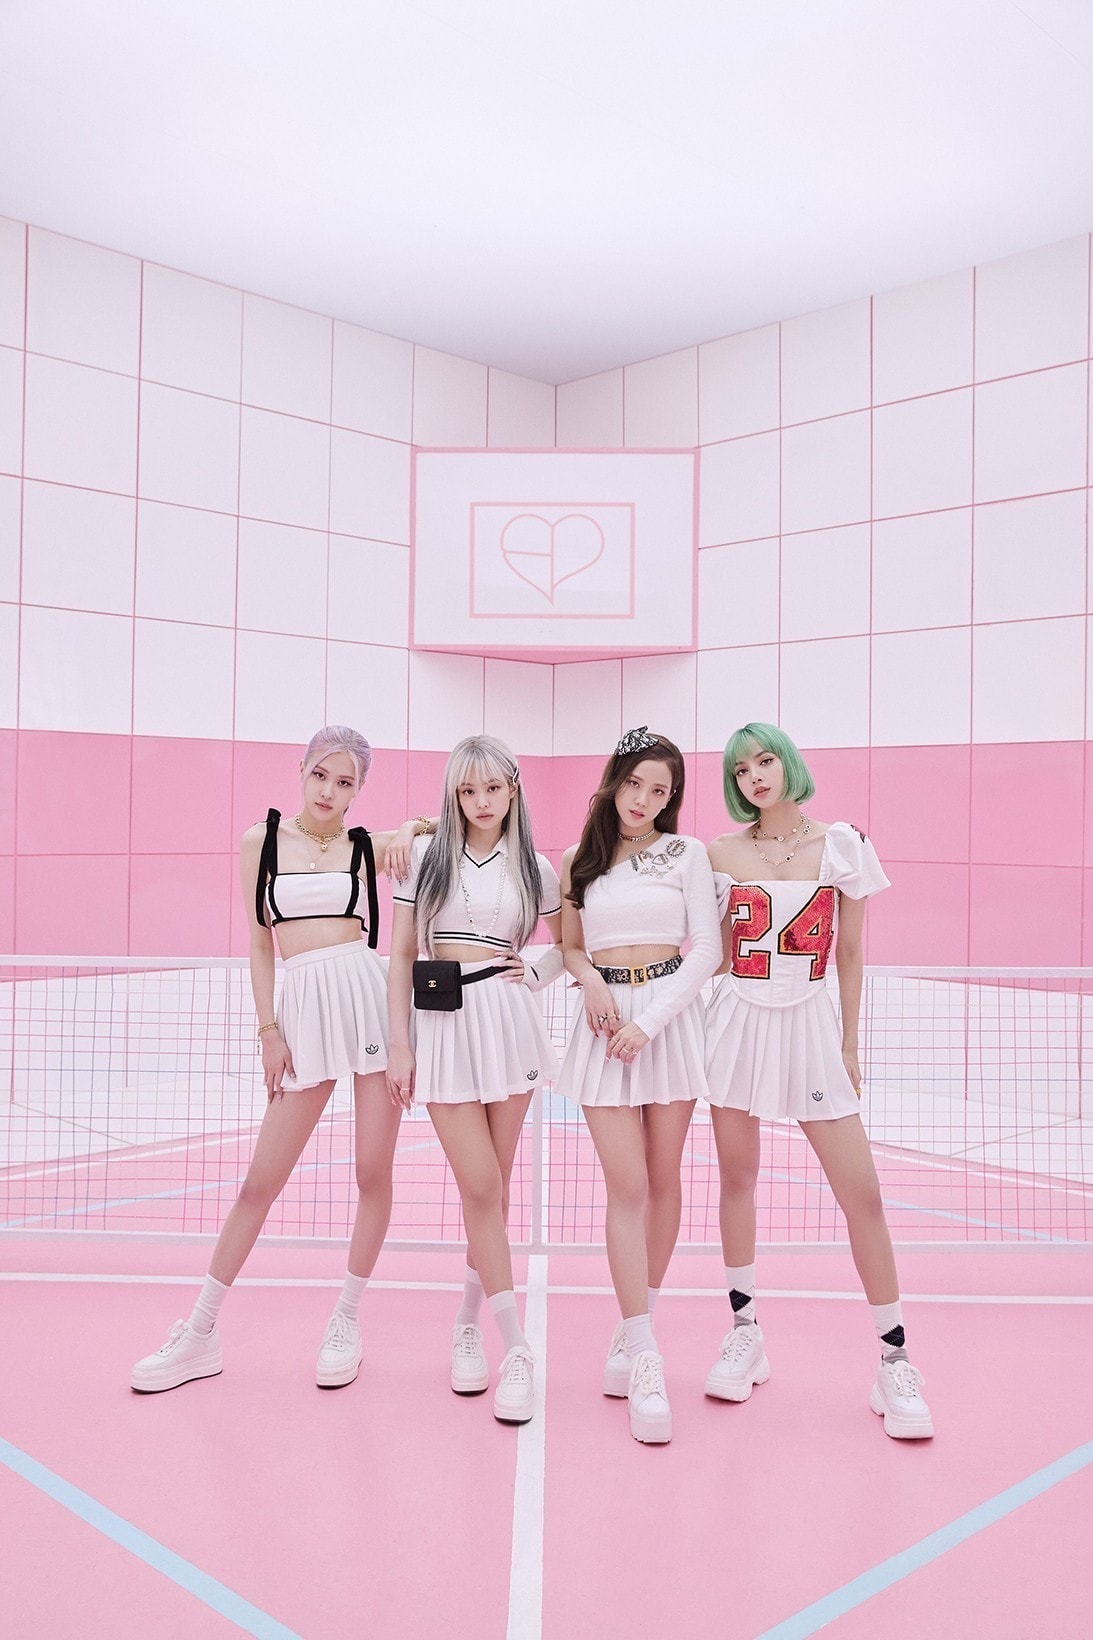 BLACKPINK takes a step towards eco-friendly album consumption with BORN PINK